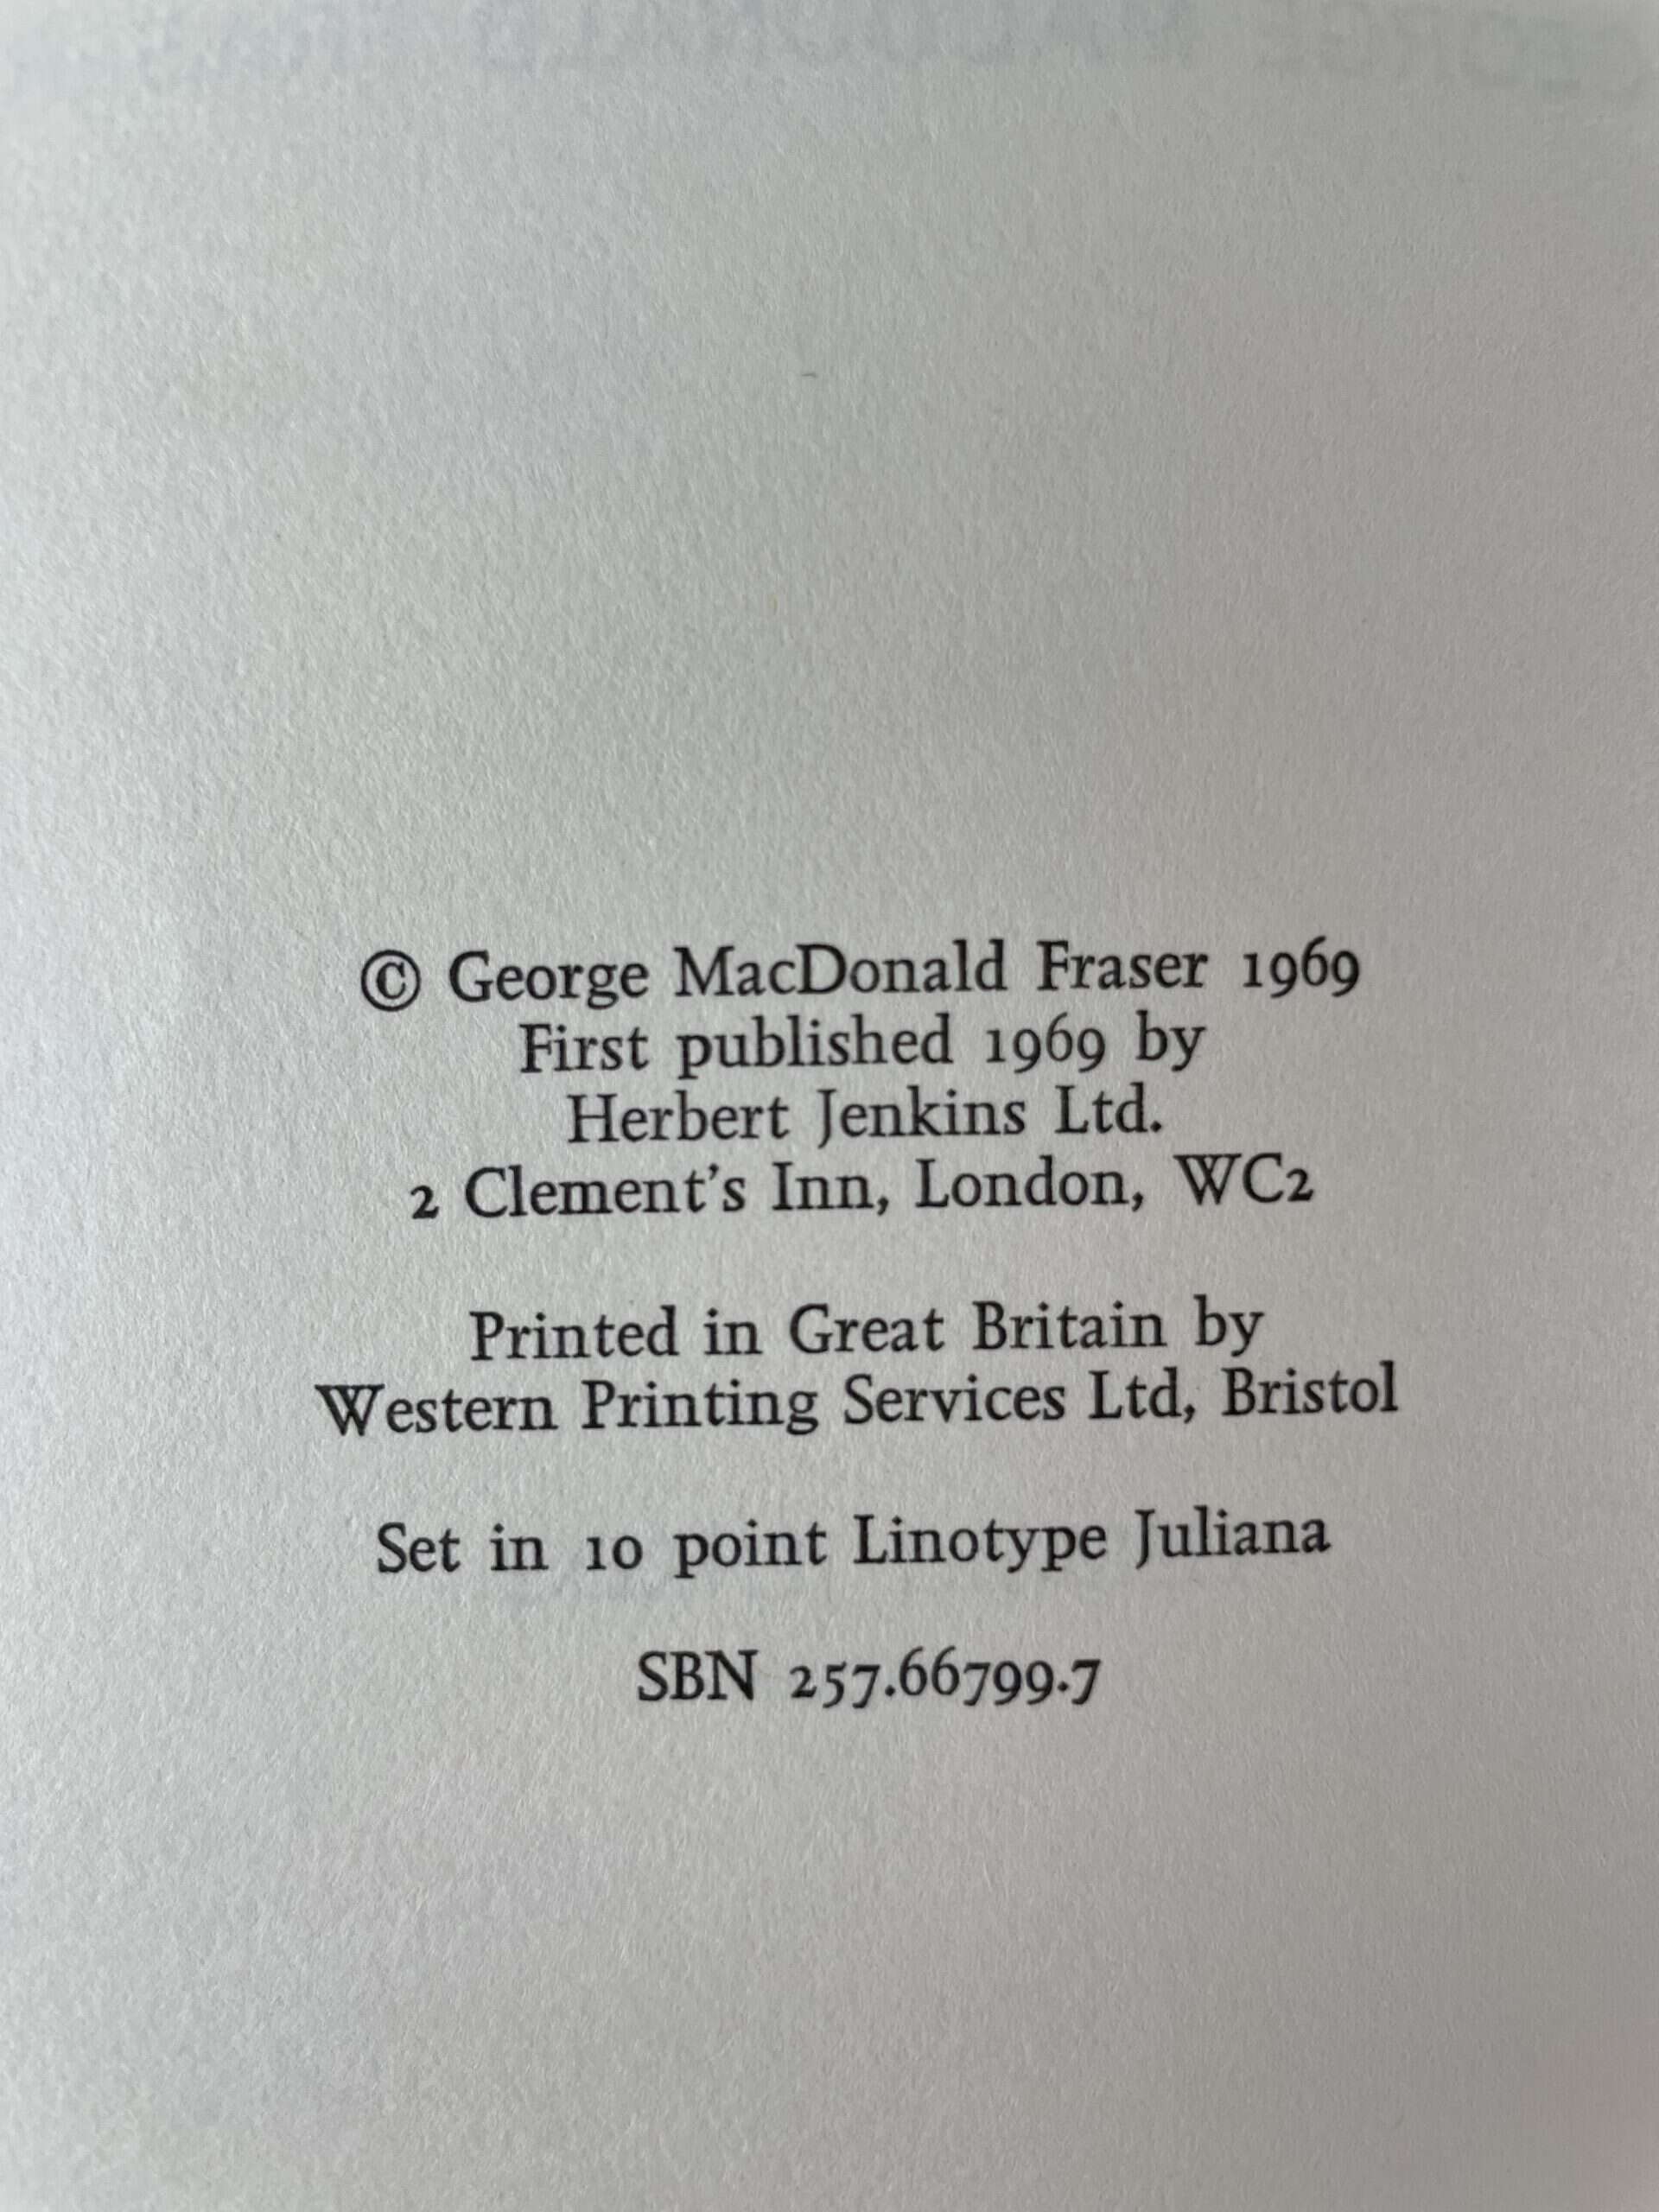 george macdionald fraser collection3